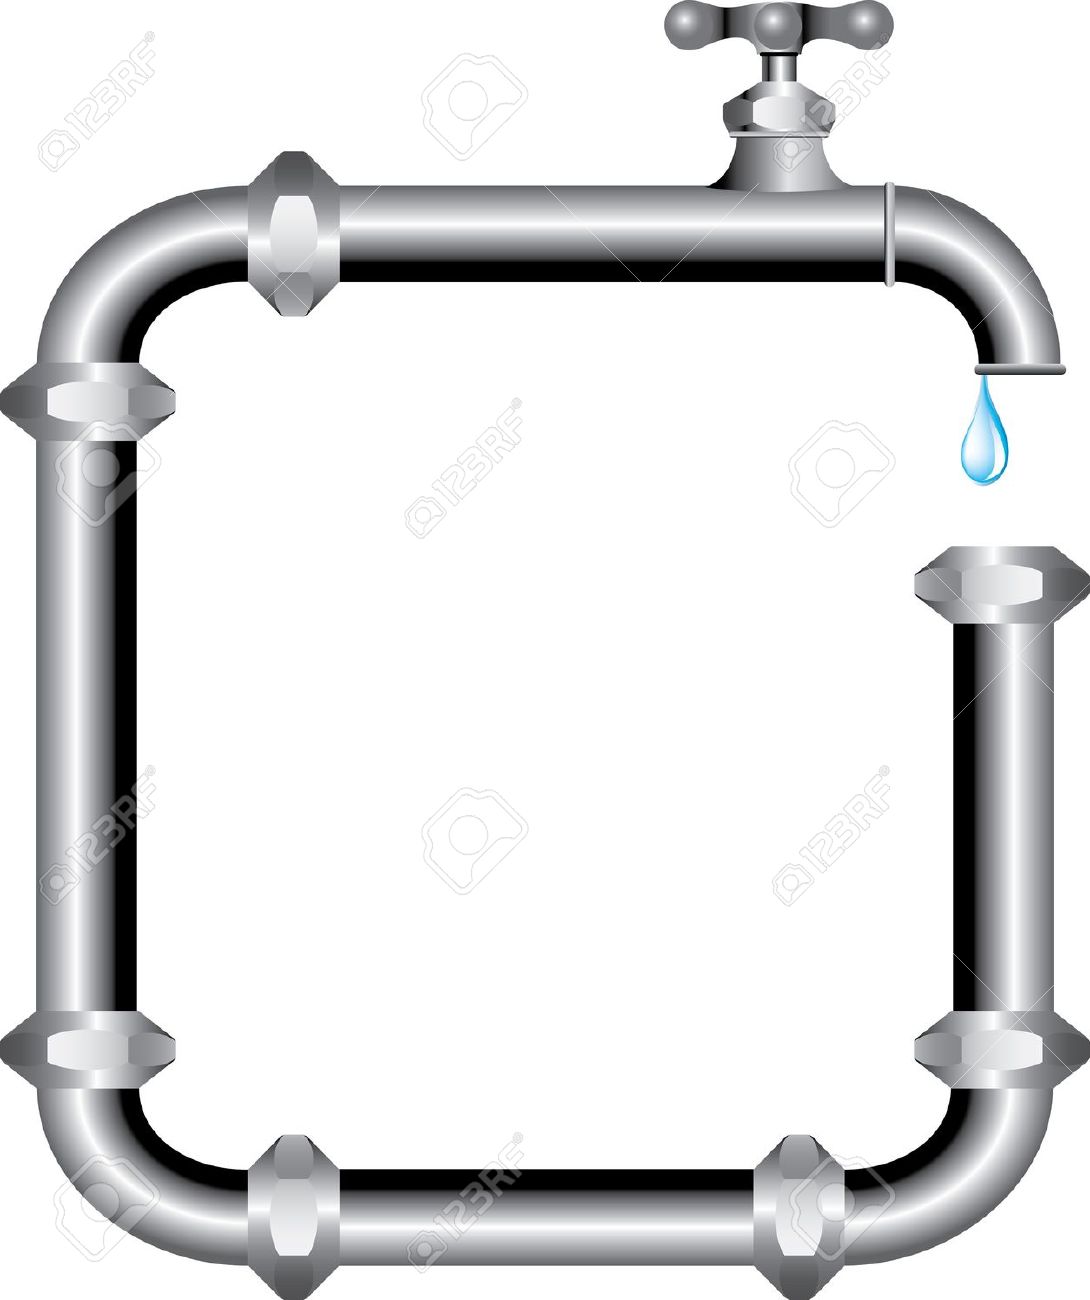 Collection of Pipes clipart Free download best Pipes